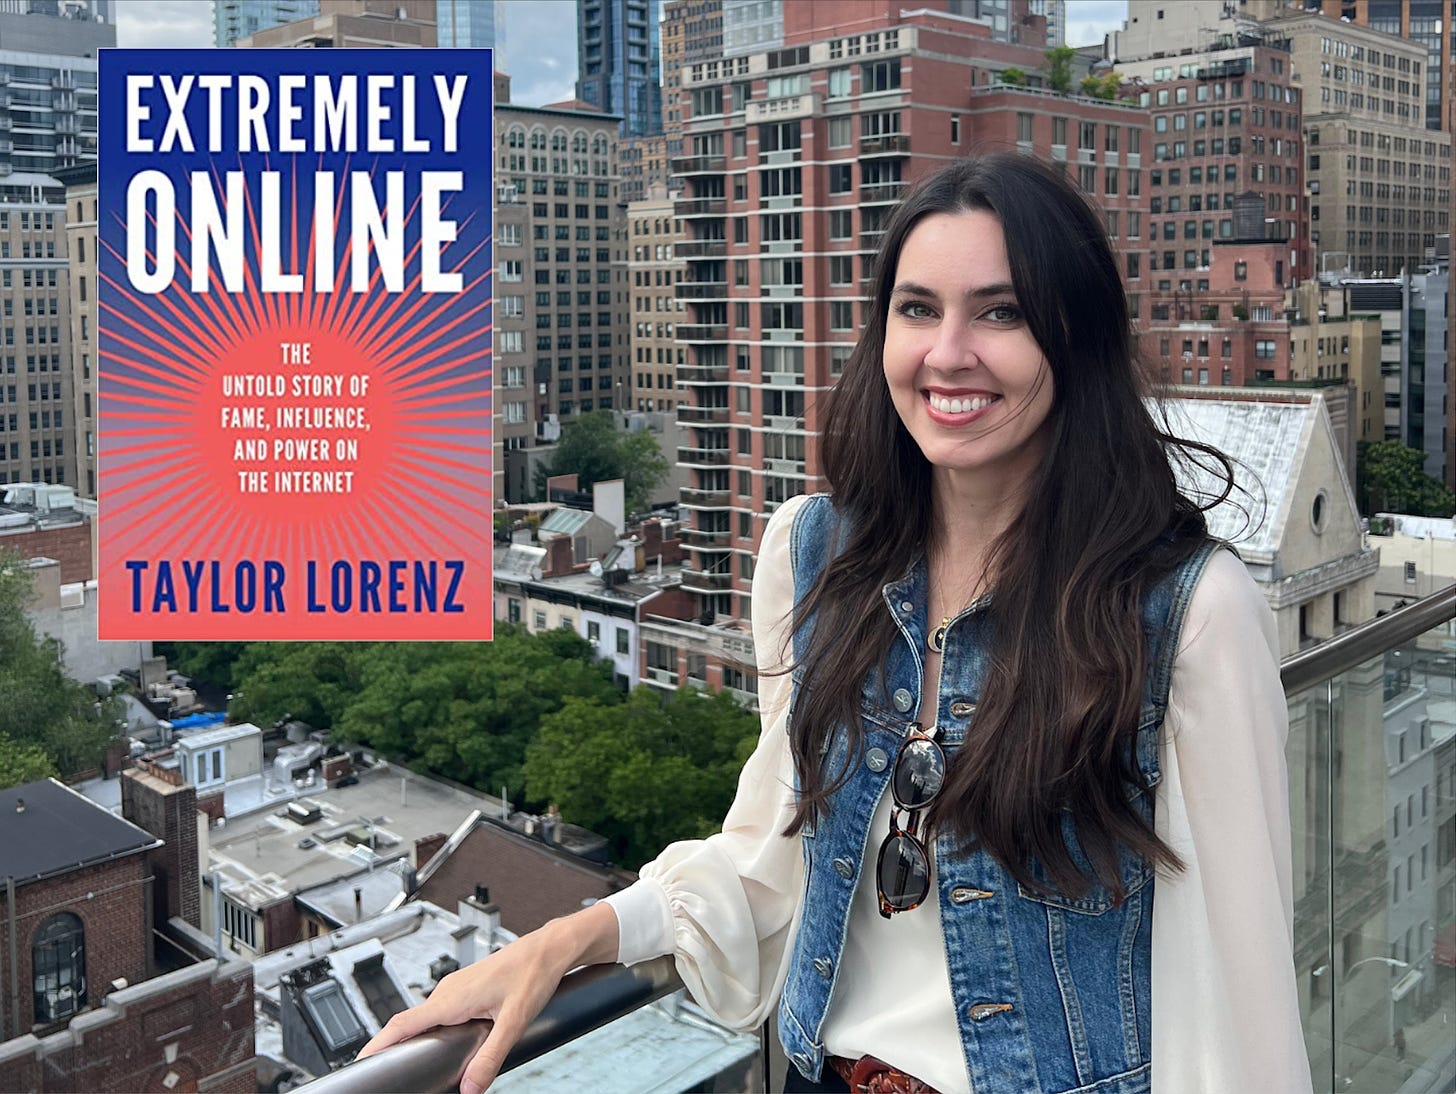 Photo of Washington Post tech columnist Taylor Lorenz standing against a NYC backdrop. There is a book cover inset in this image titled Extremely Online